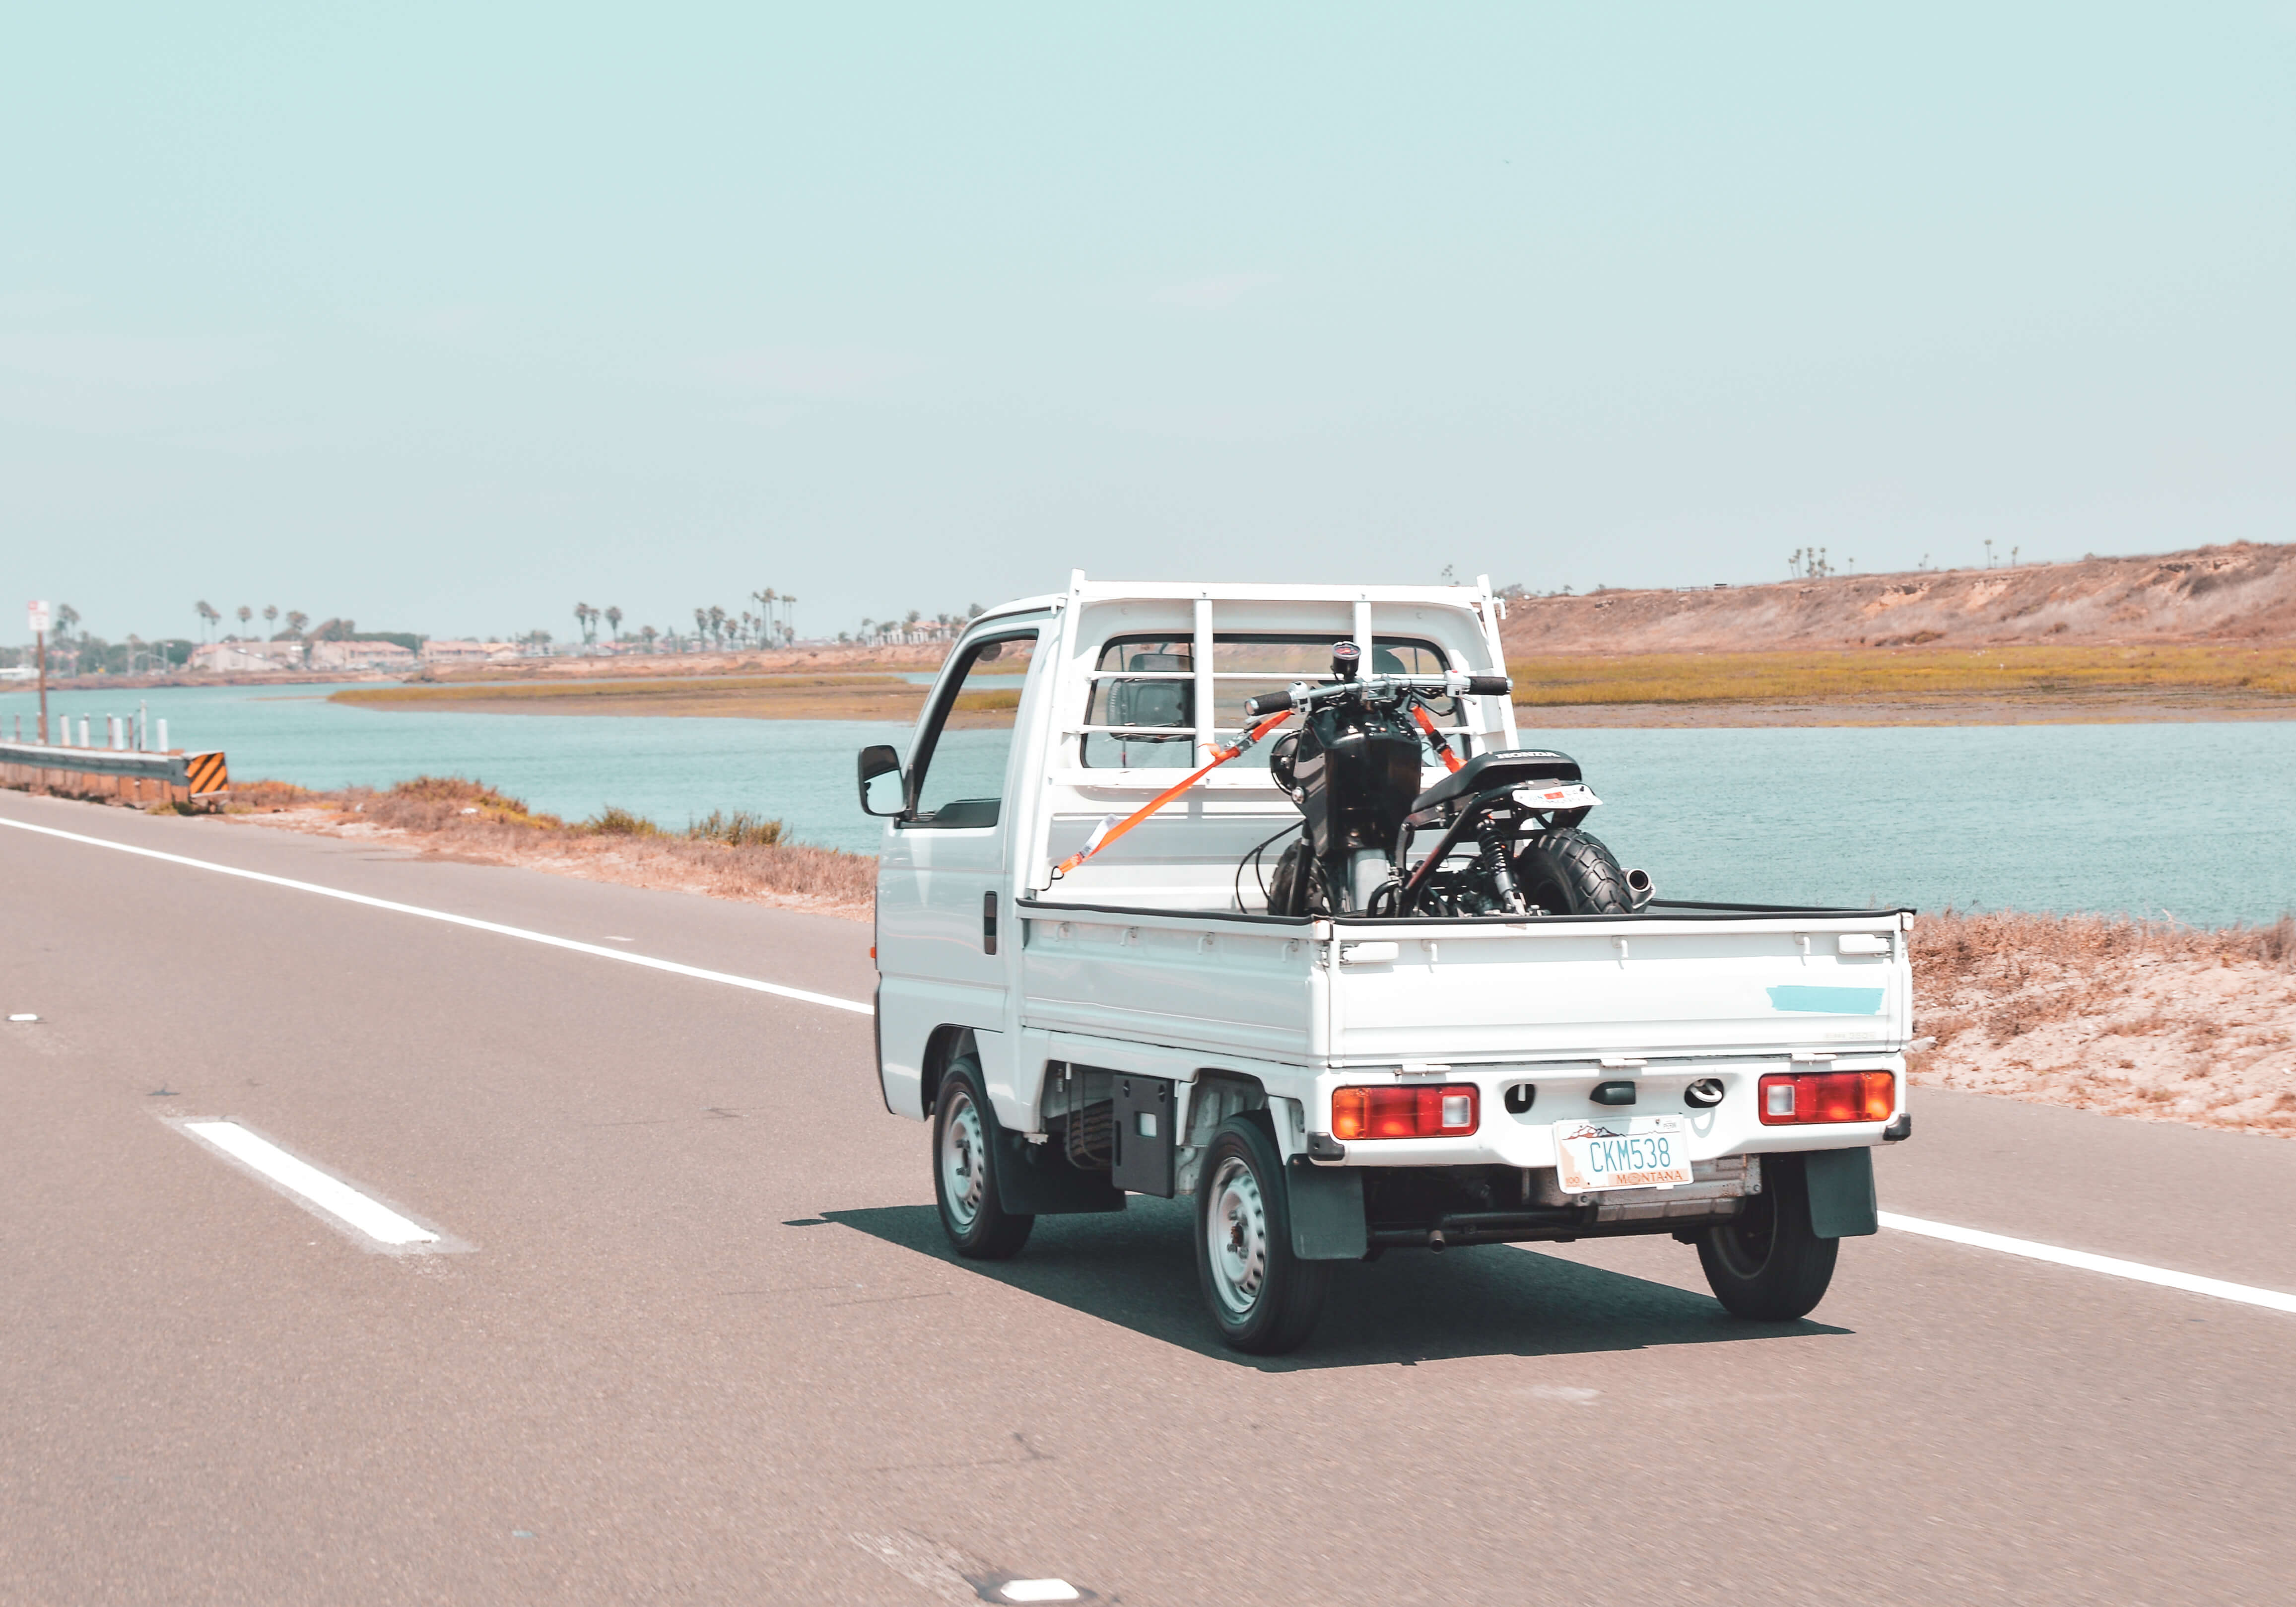 White Honda Acty mini truck carrying a motorcycle on an open road by a scenic waterway, showcasing its versatility and fuel efficiency on a long-distance journey from York, Maine to Miami, Florida.